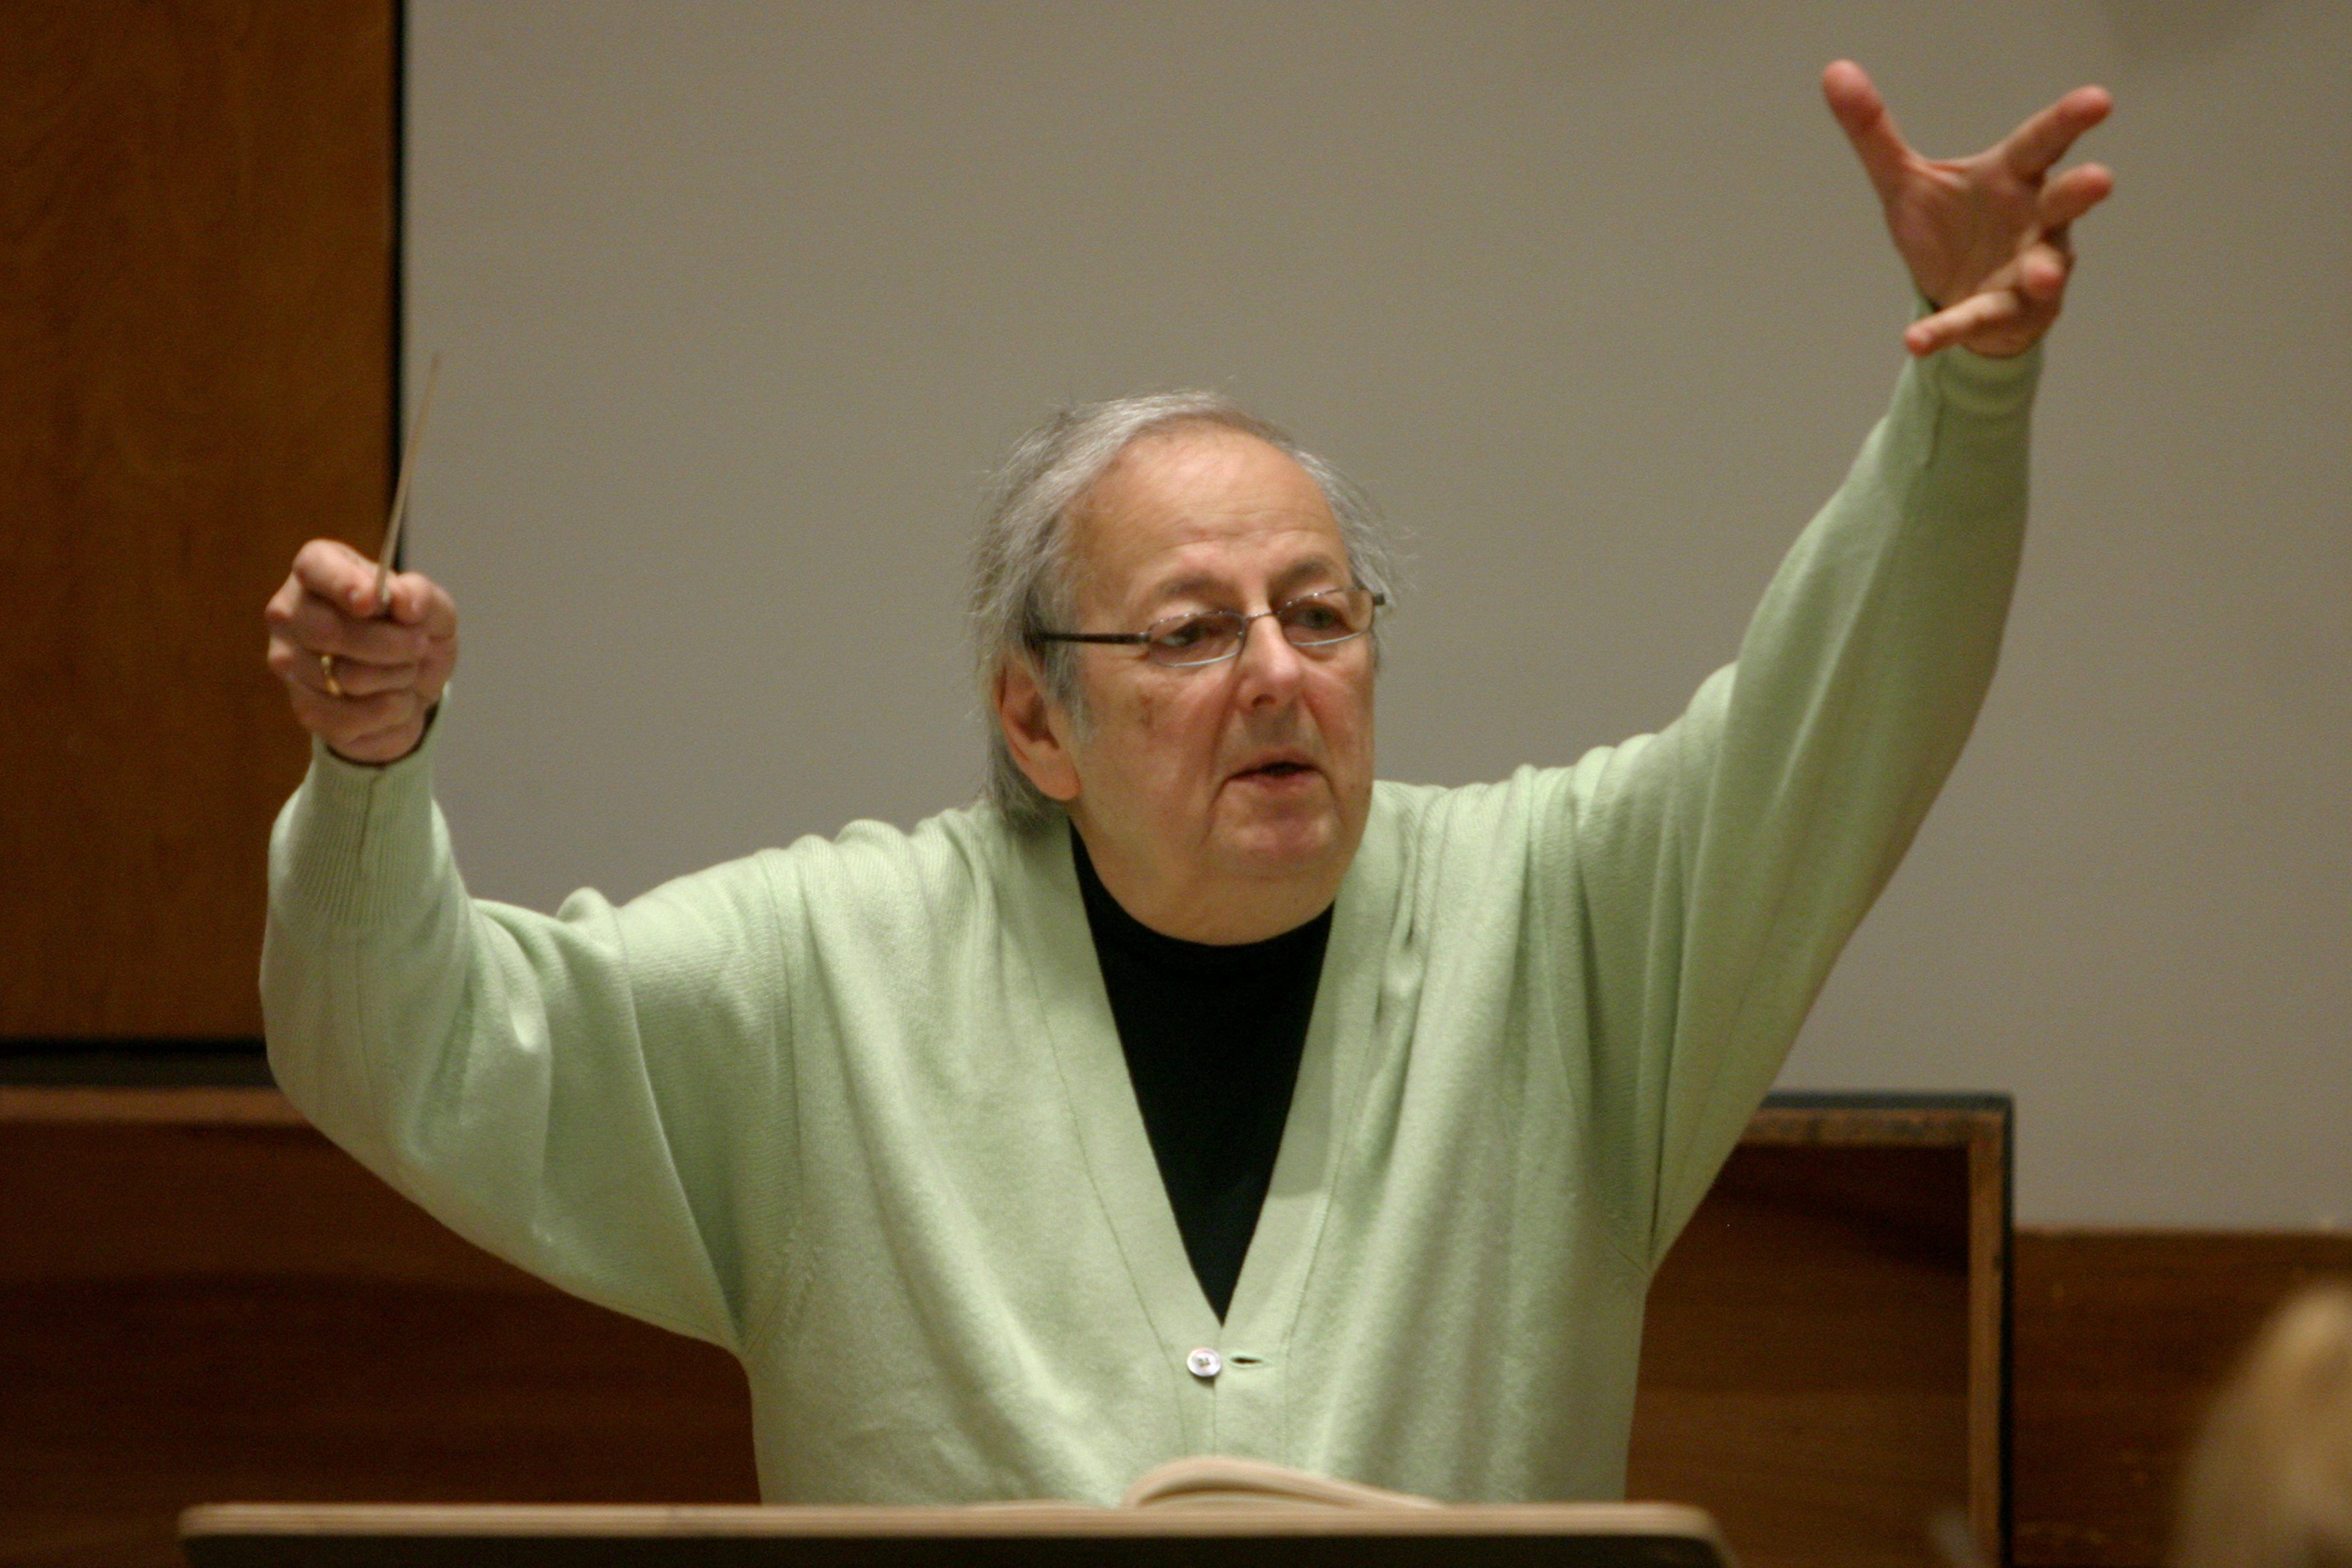 André Previn rehearsing with the Juilliard Orchestra at the Juilliard School | Photo: Getty Images